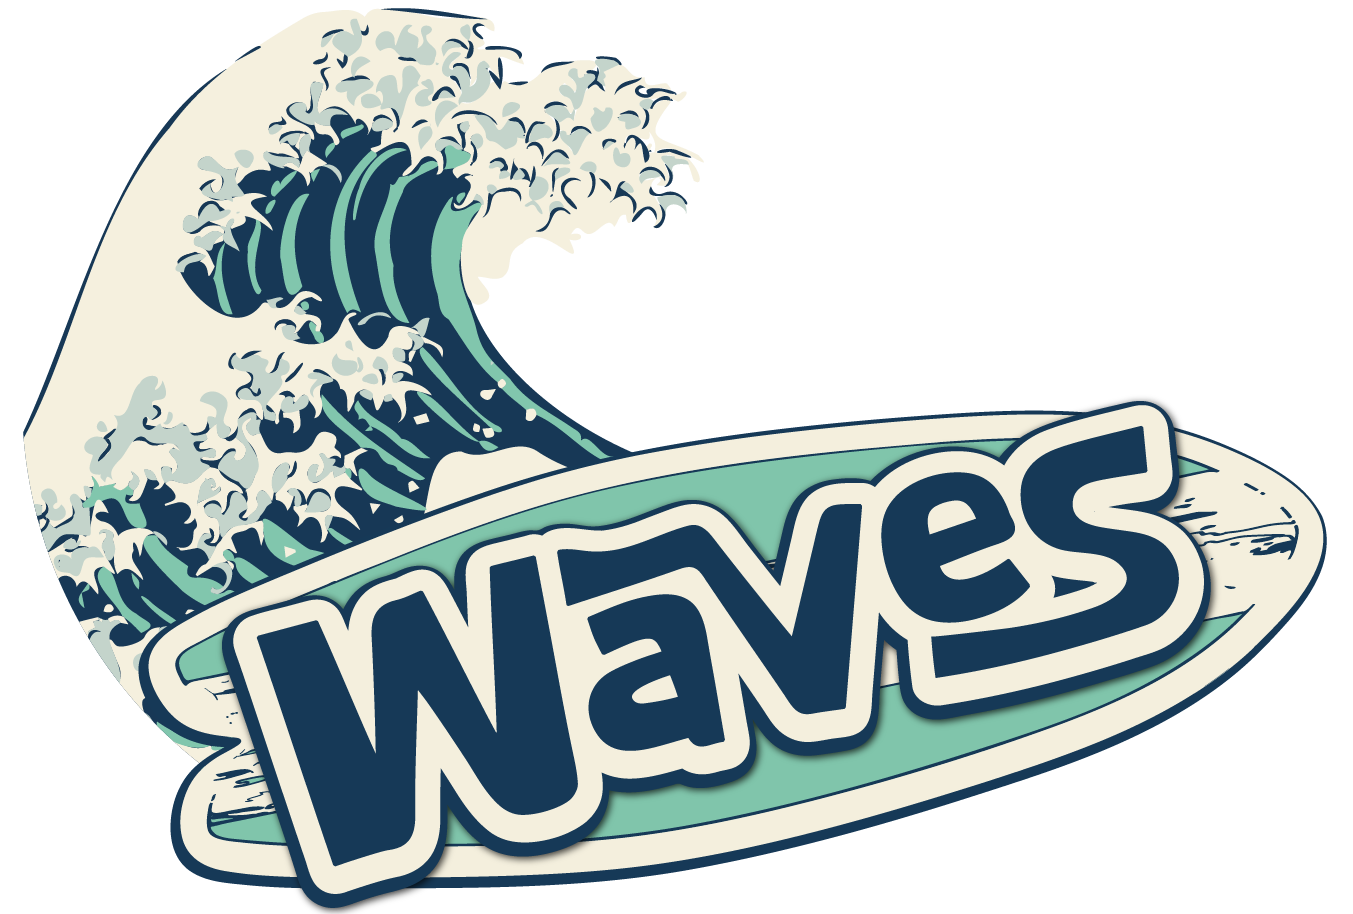 WAVES CAR WASH LOGO - VINTAGE SURFBOARD WITH THE WORD WAVES CAR WASH ON TOP